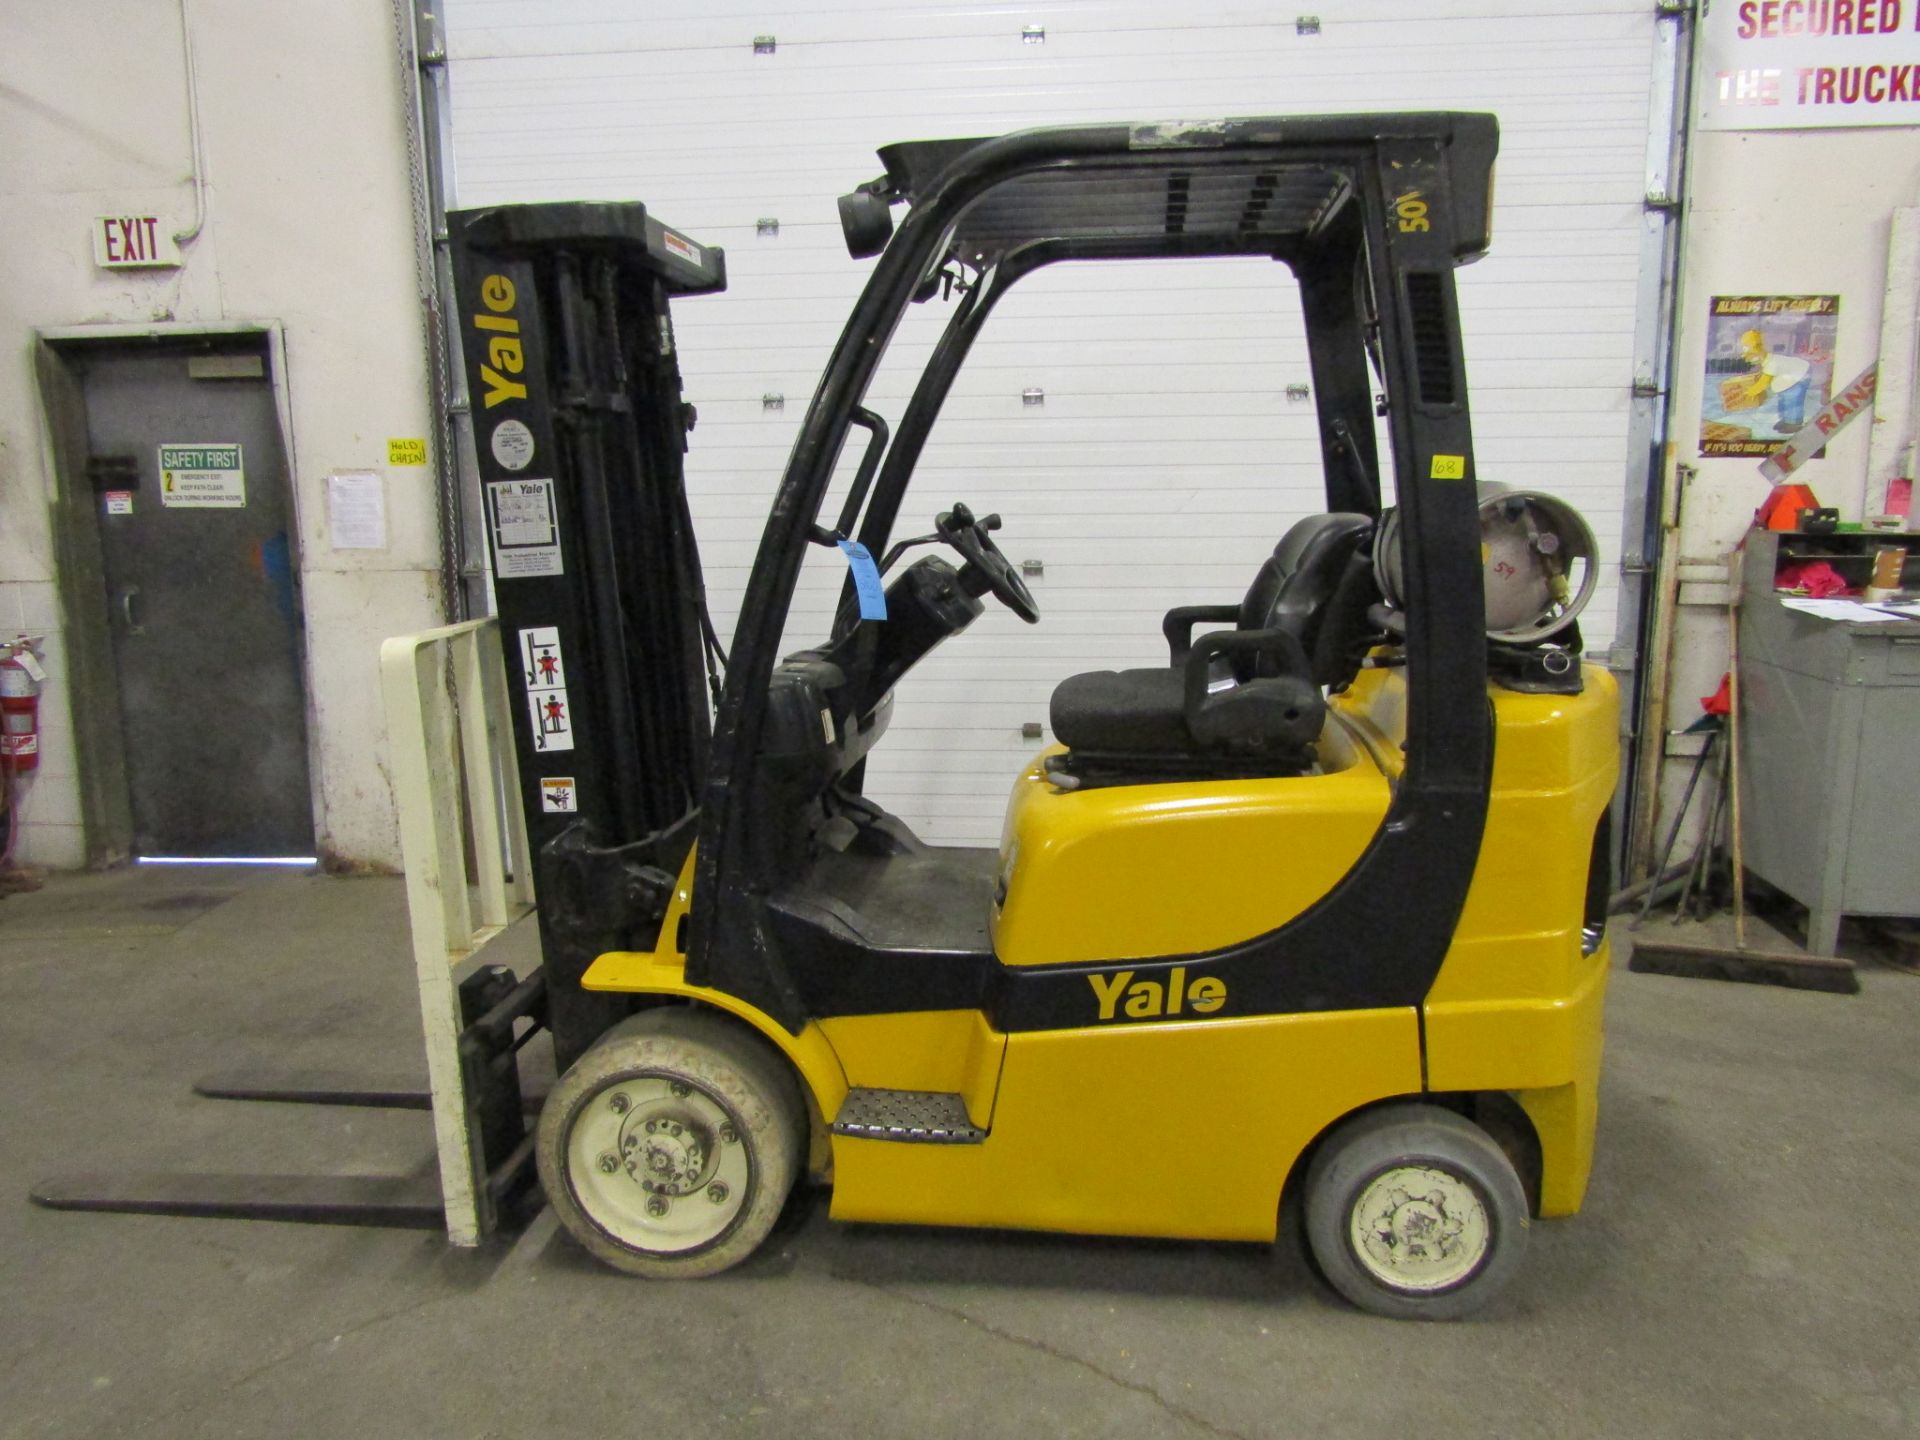 2008 Yale 5000lbs Capacity Forklift - LPG (propane) with 3-stage mast & sideshift (no propane tank